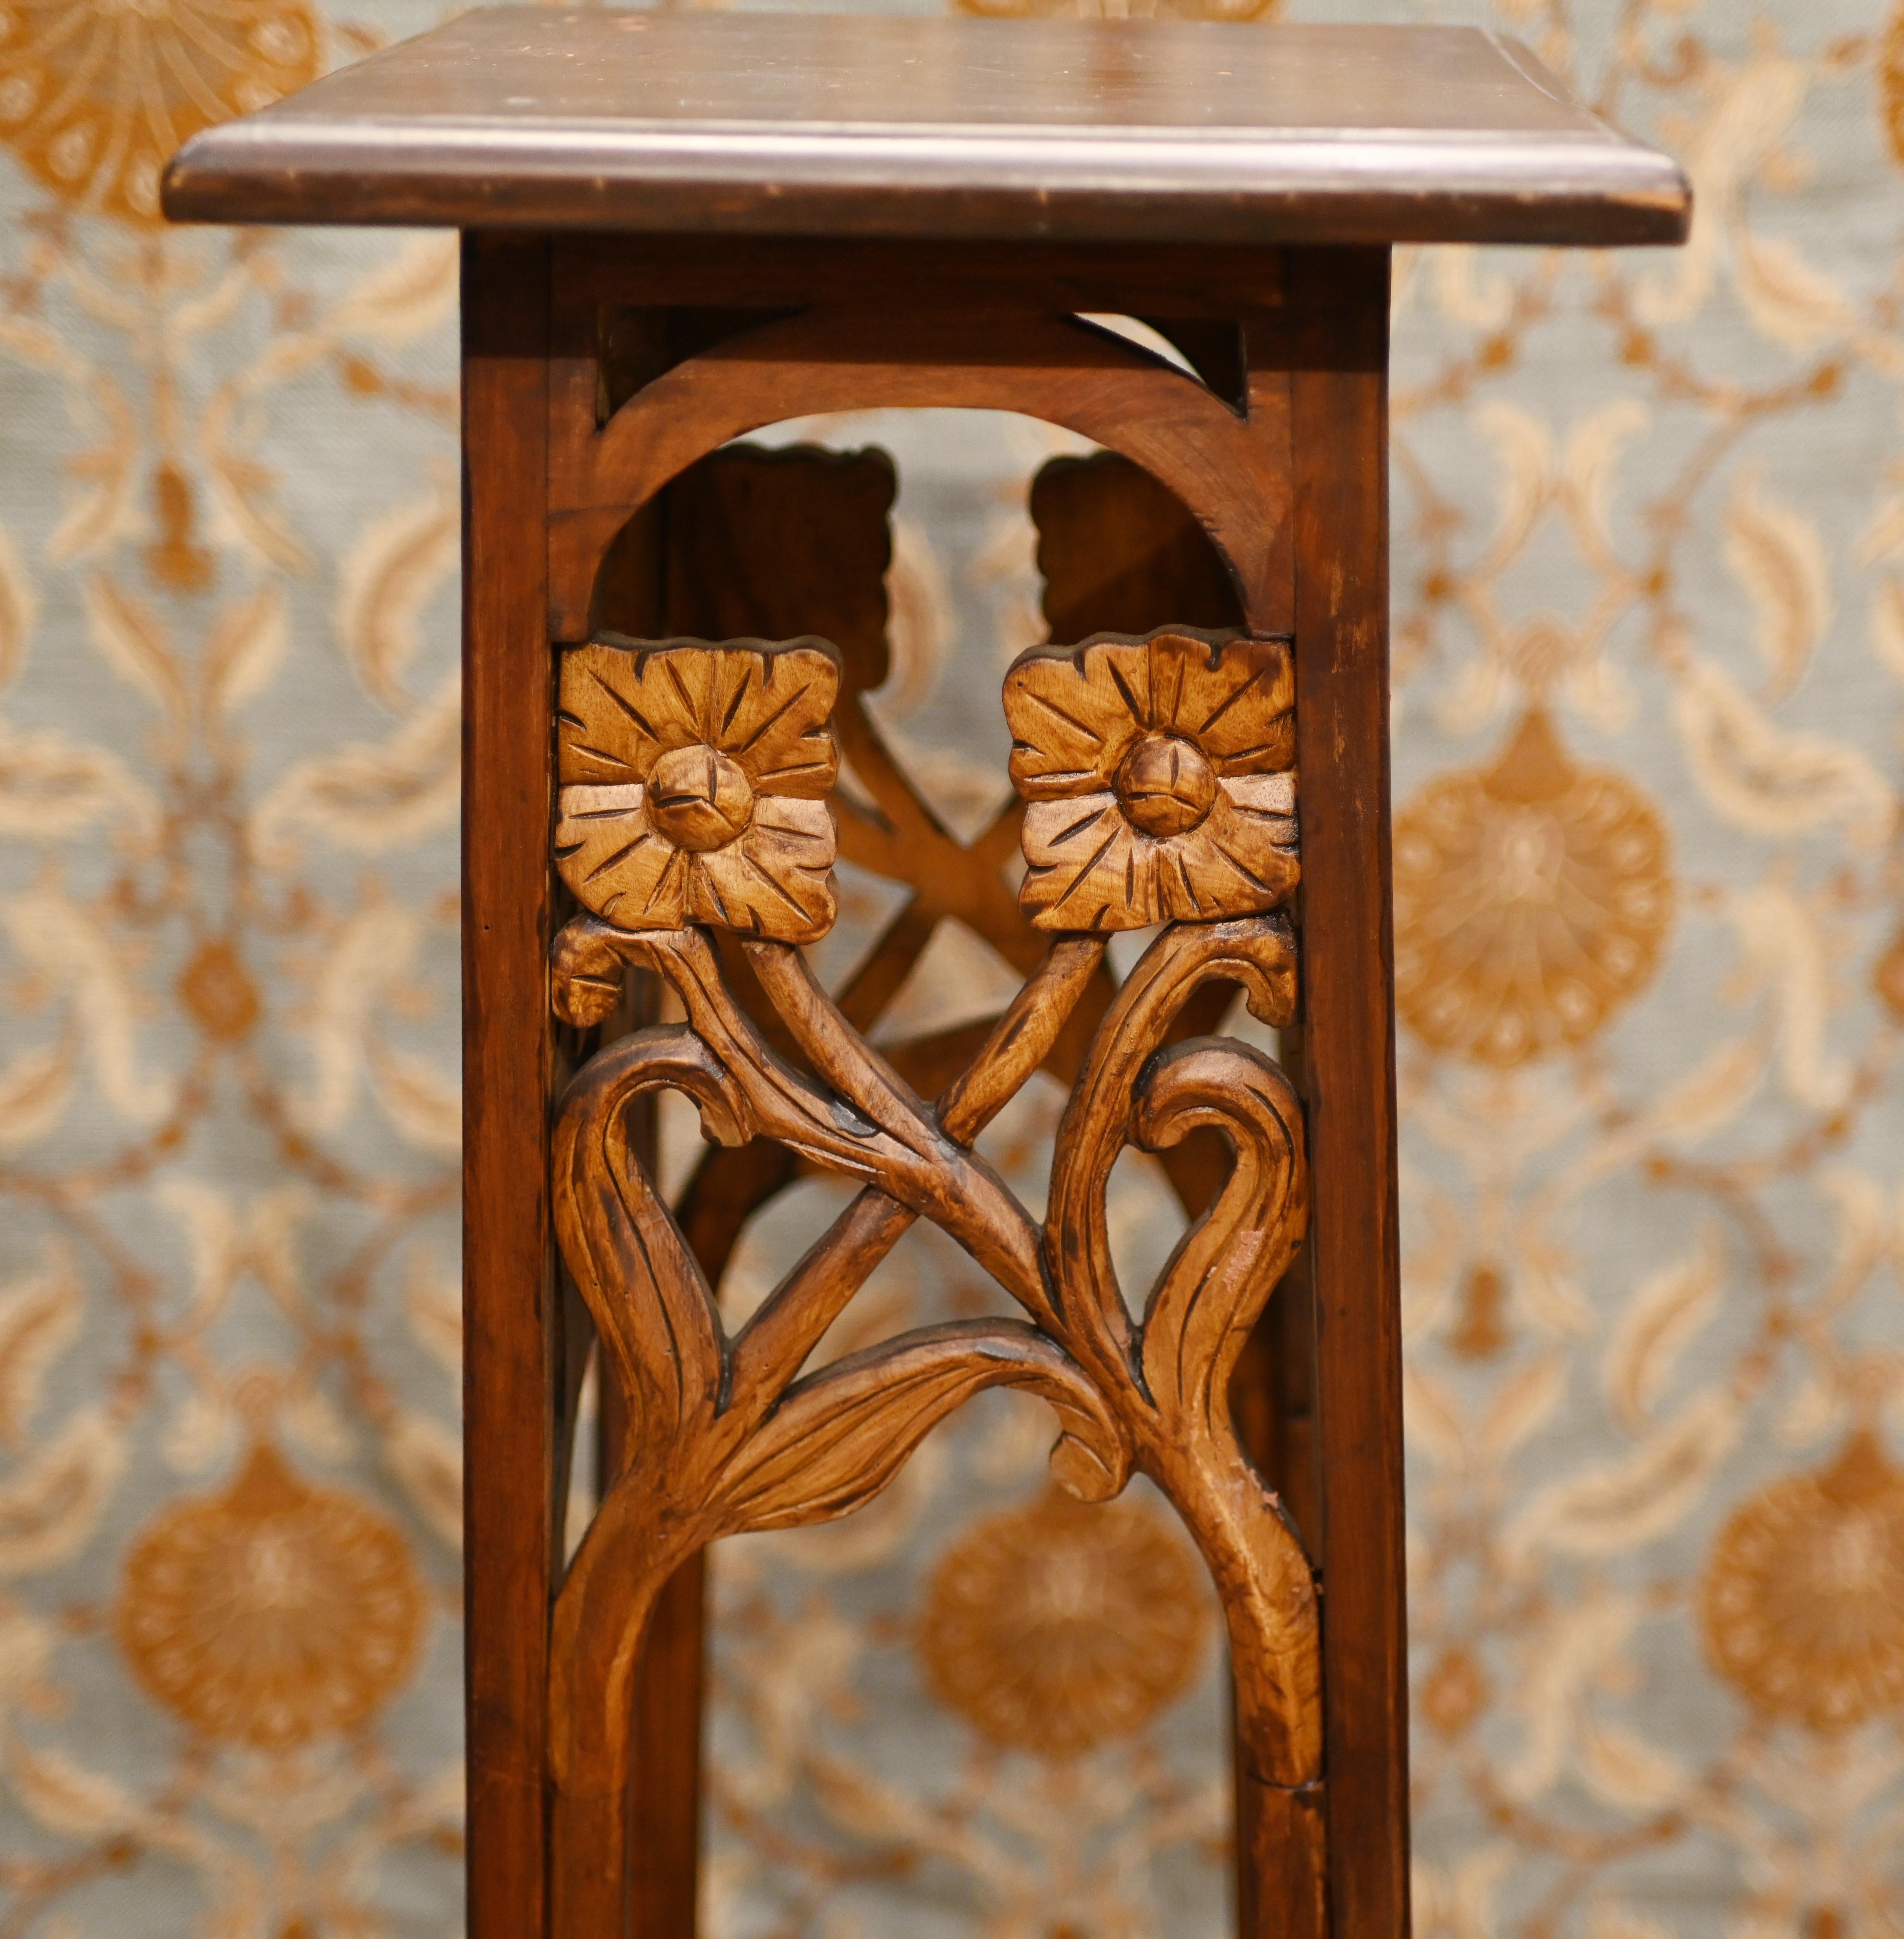 Early 20th Century Art Nouveau Pedestal Stand Table 1910 For Sale